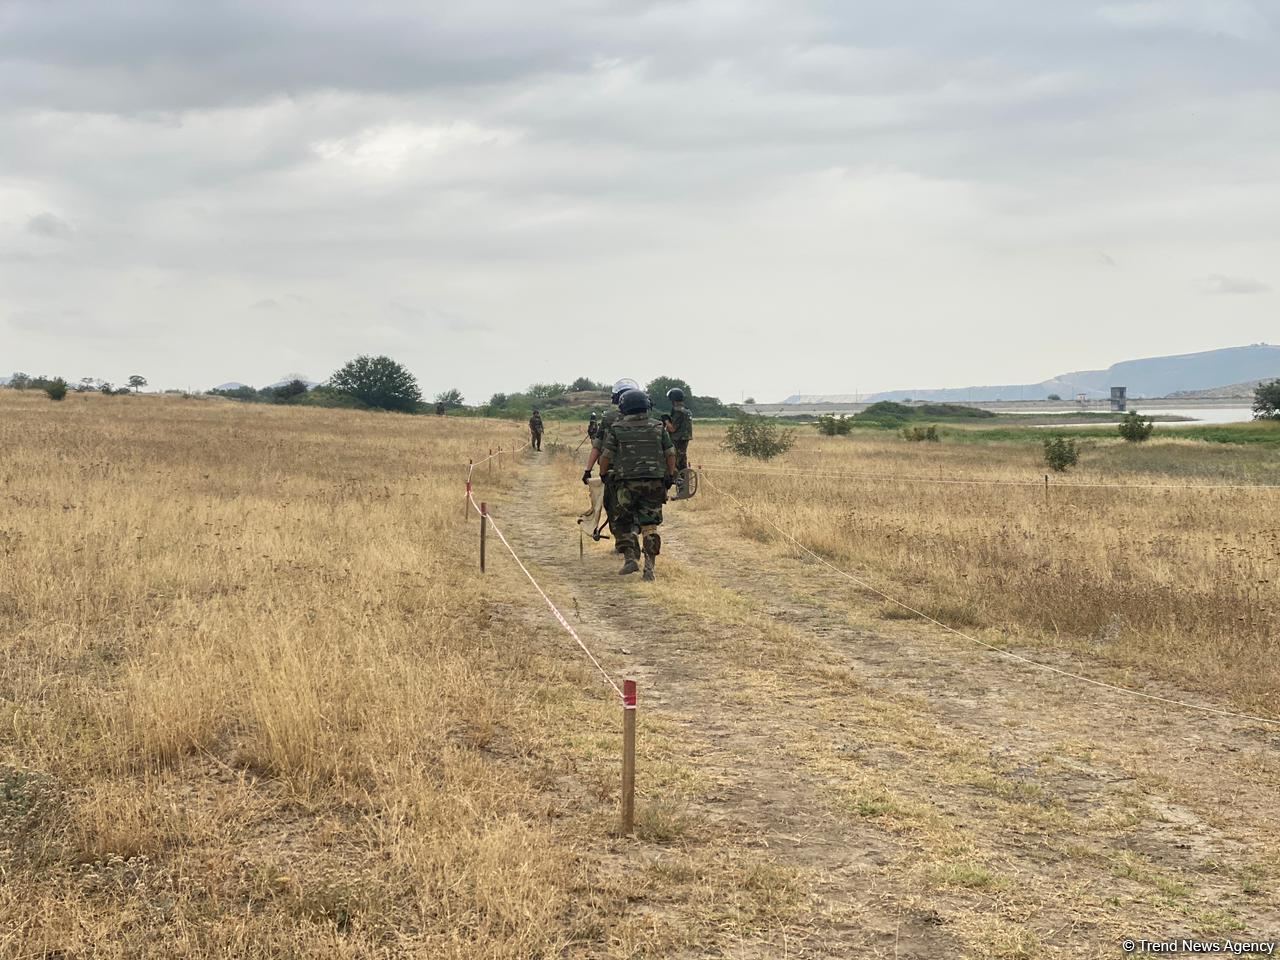 Mine clearance underway on suburbs of reservoir in Azerbaijan's liberated Khojaly - Trend TV (PHOTO)